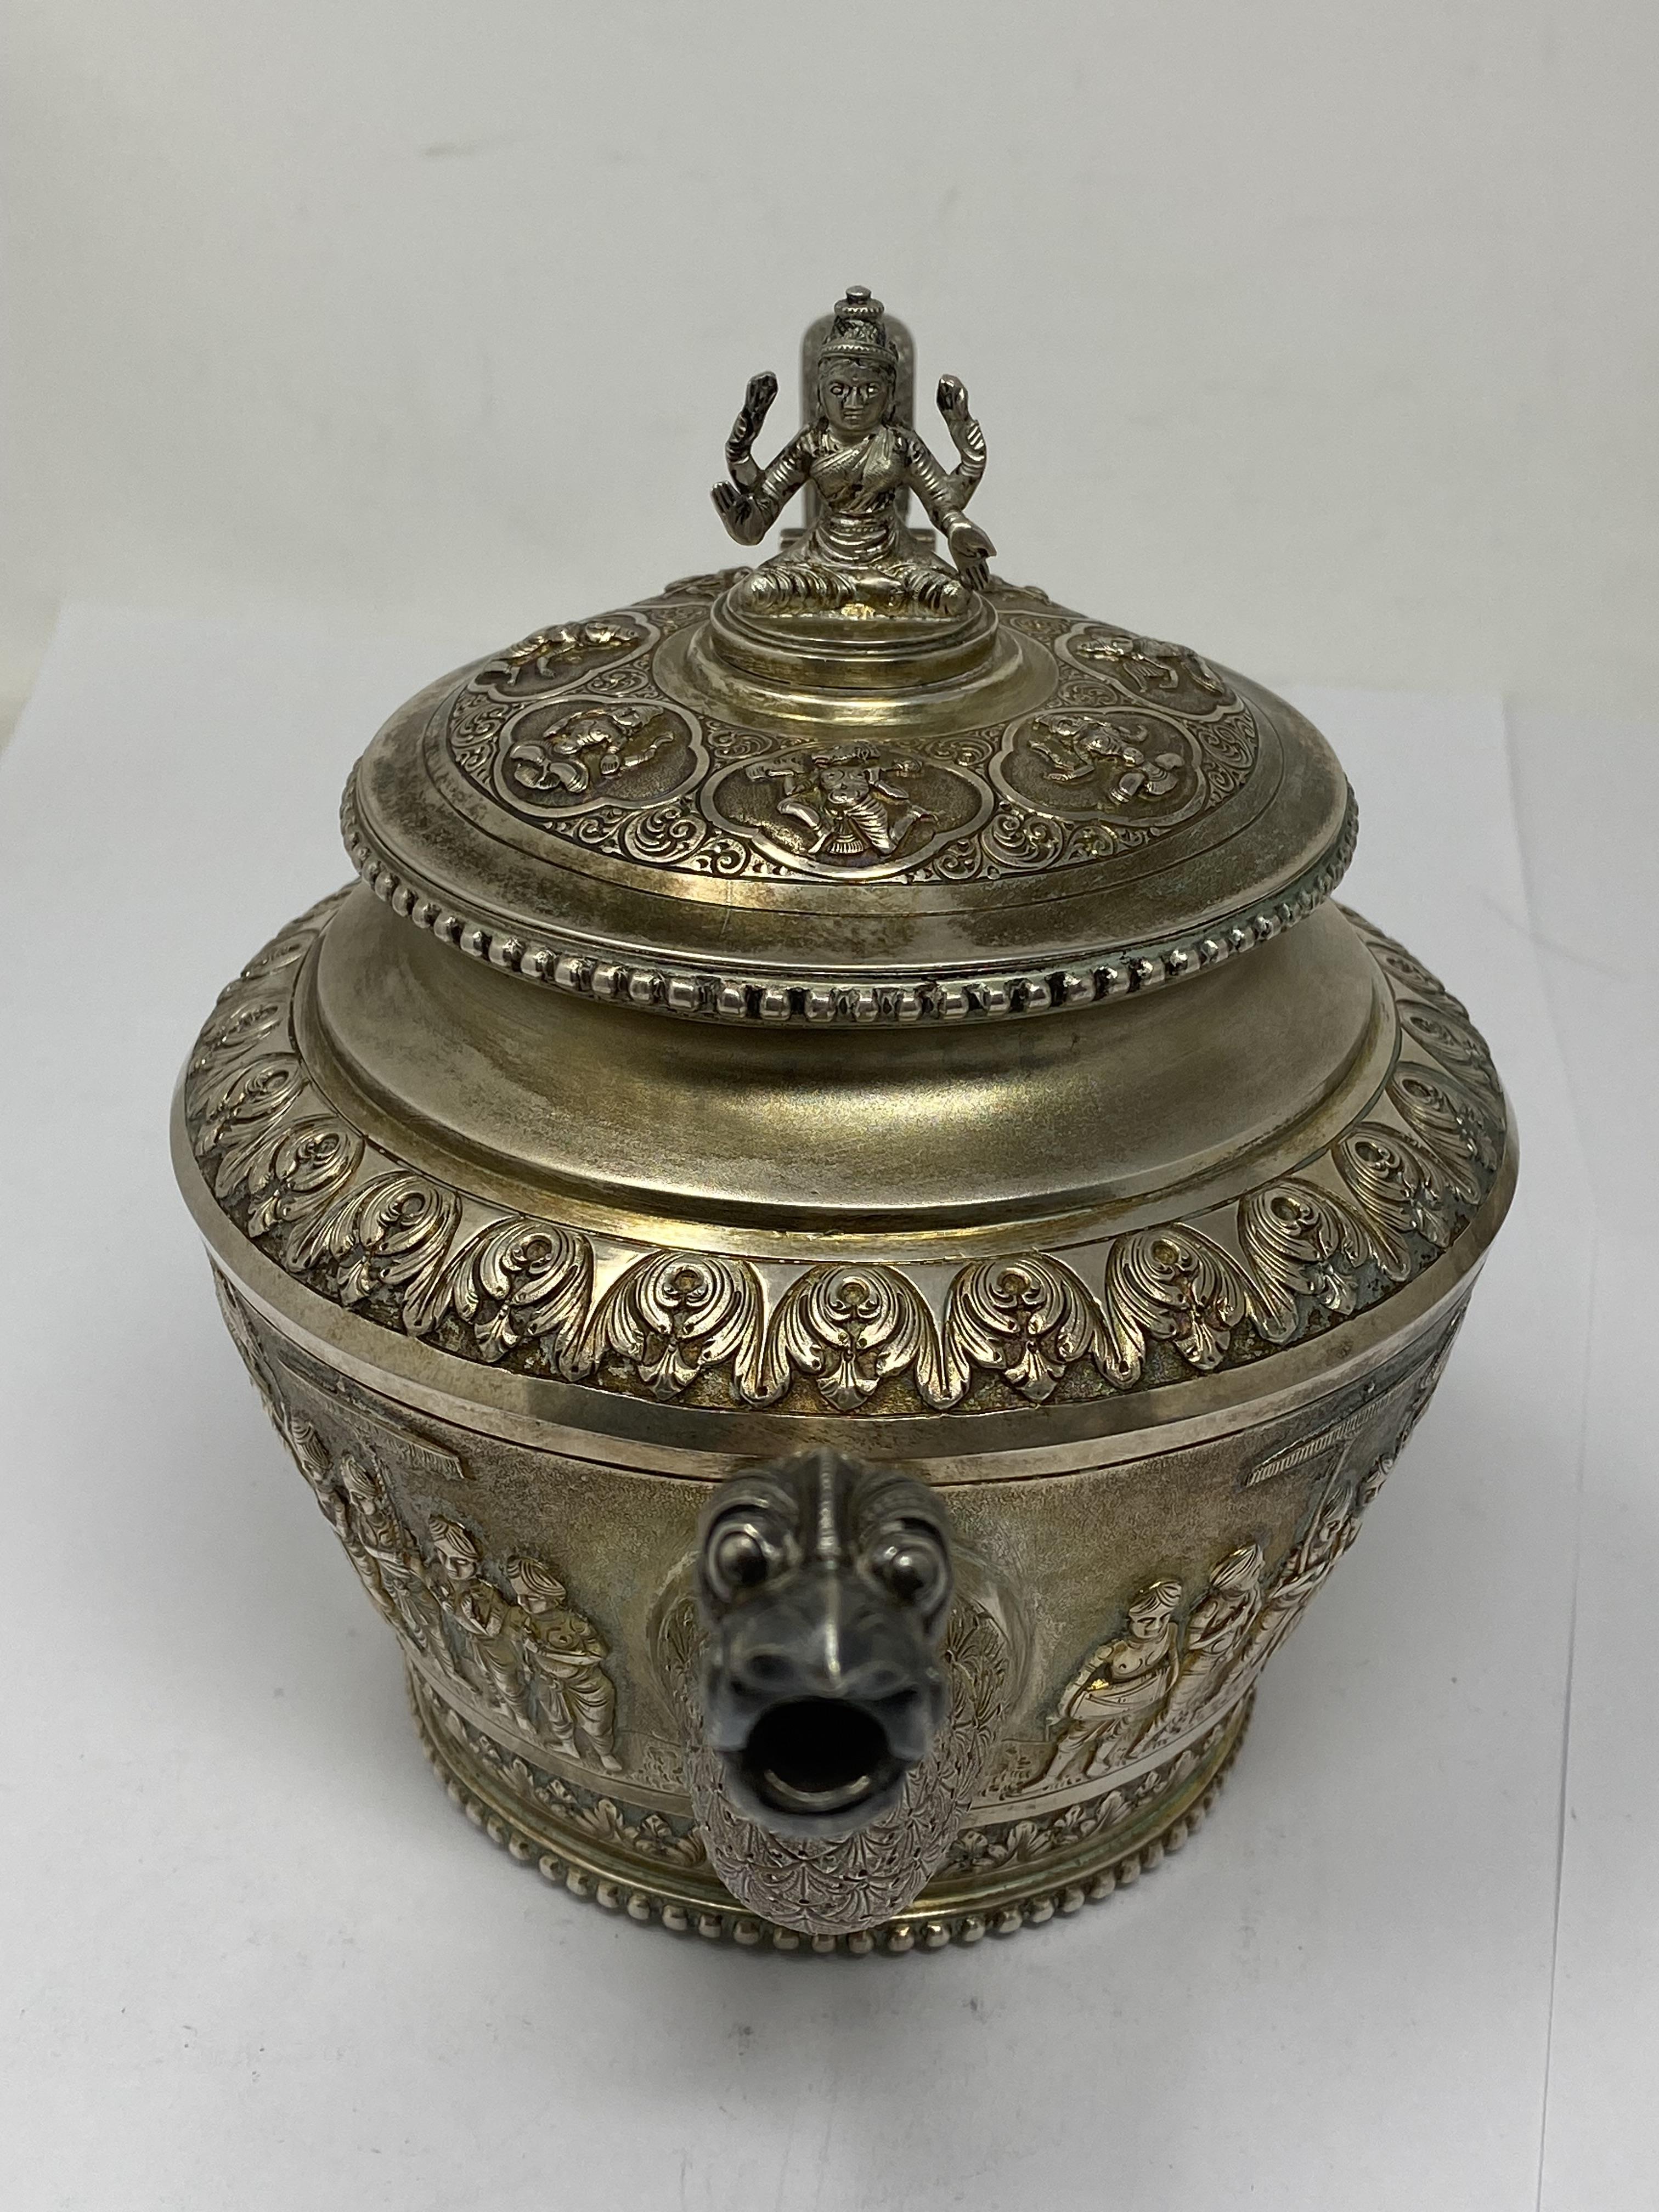 ˜A PARCEL-GILT-SILVER TEA SET, ATTRIBUTED TO P. ORR AND SONS, MADRAS (CHENNAI), INDIA, CIRCA 1905-10 - Image 13 of 18